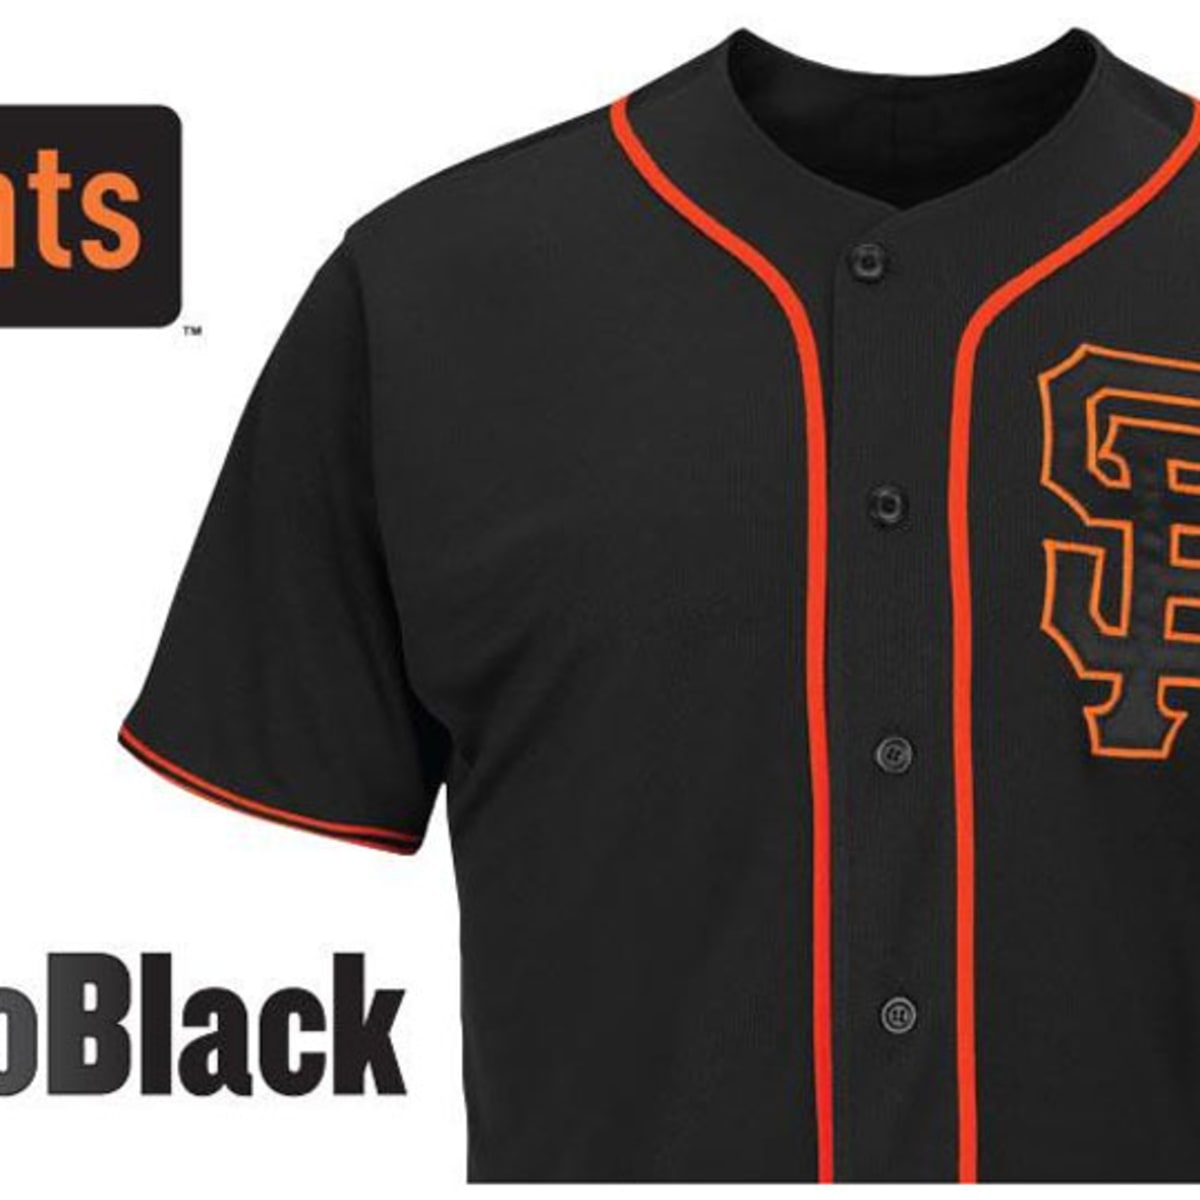 San Francisco Giants unveil new jerseys, and some fans are not into them -  ABC7 San Francisco